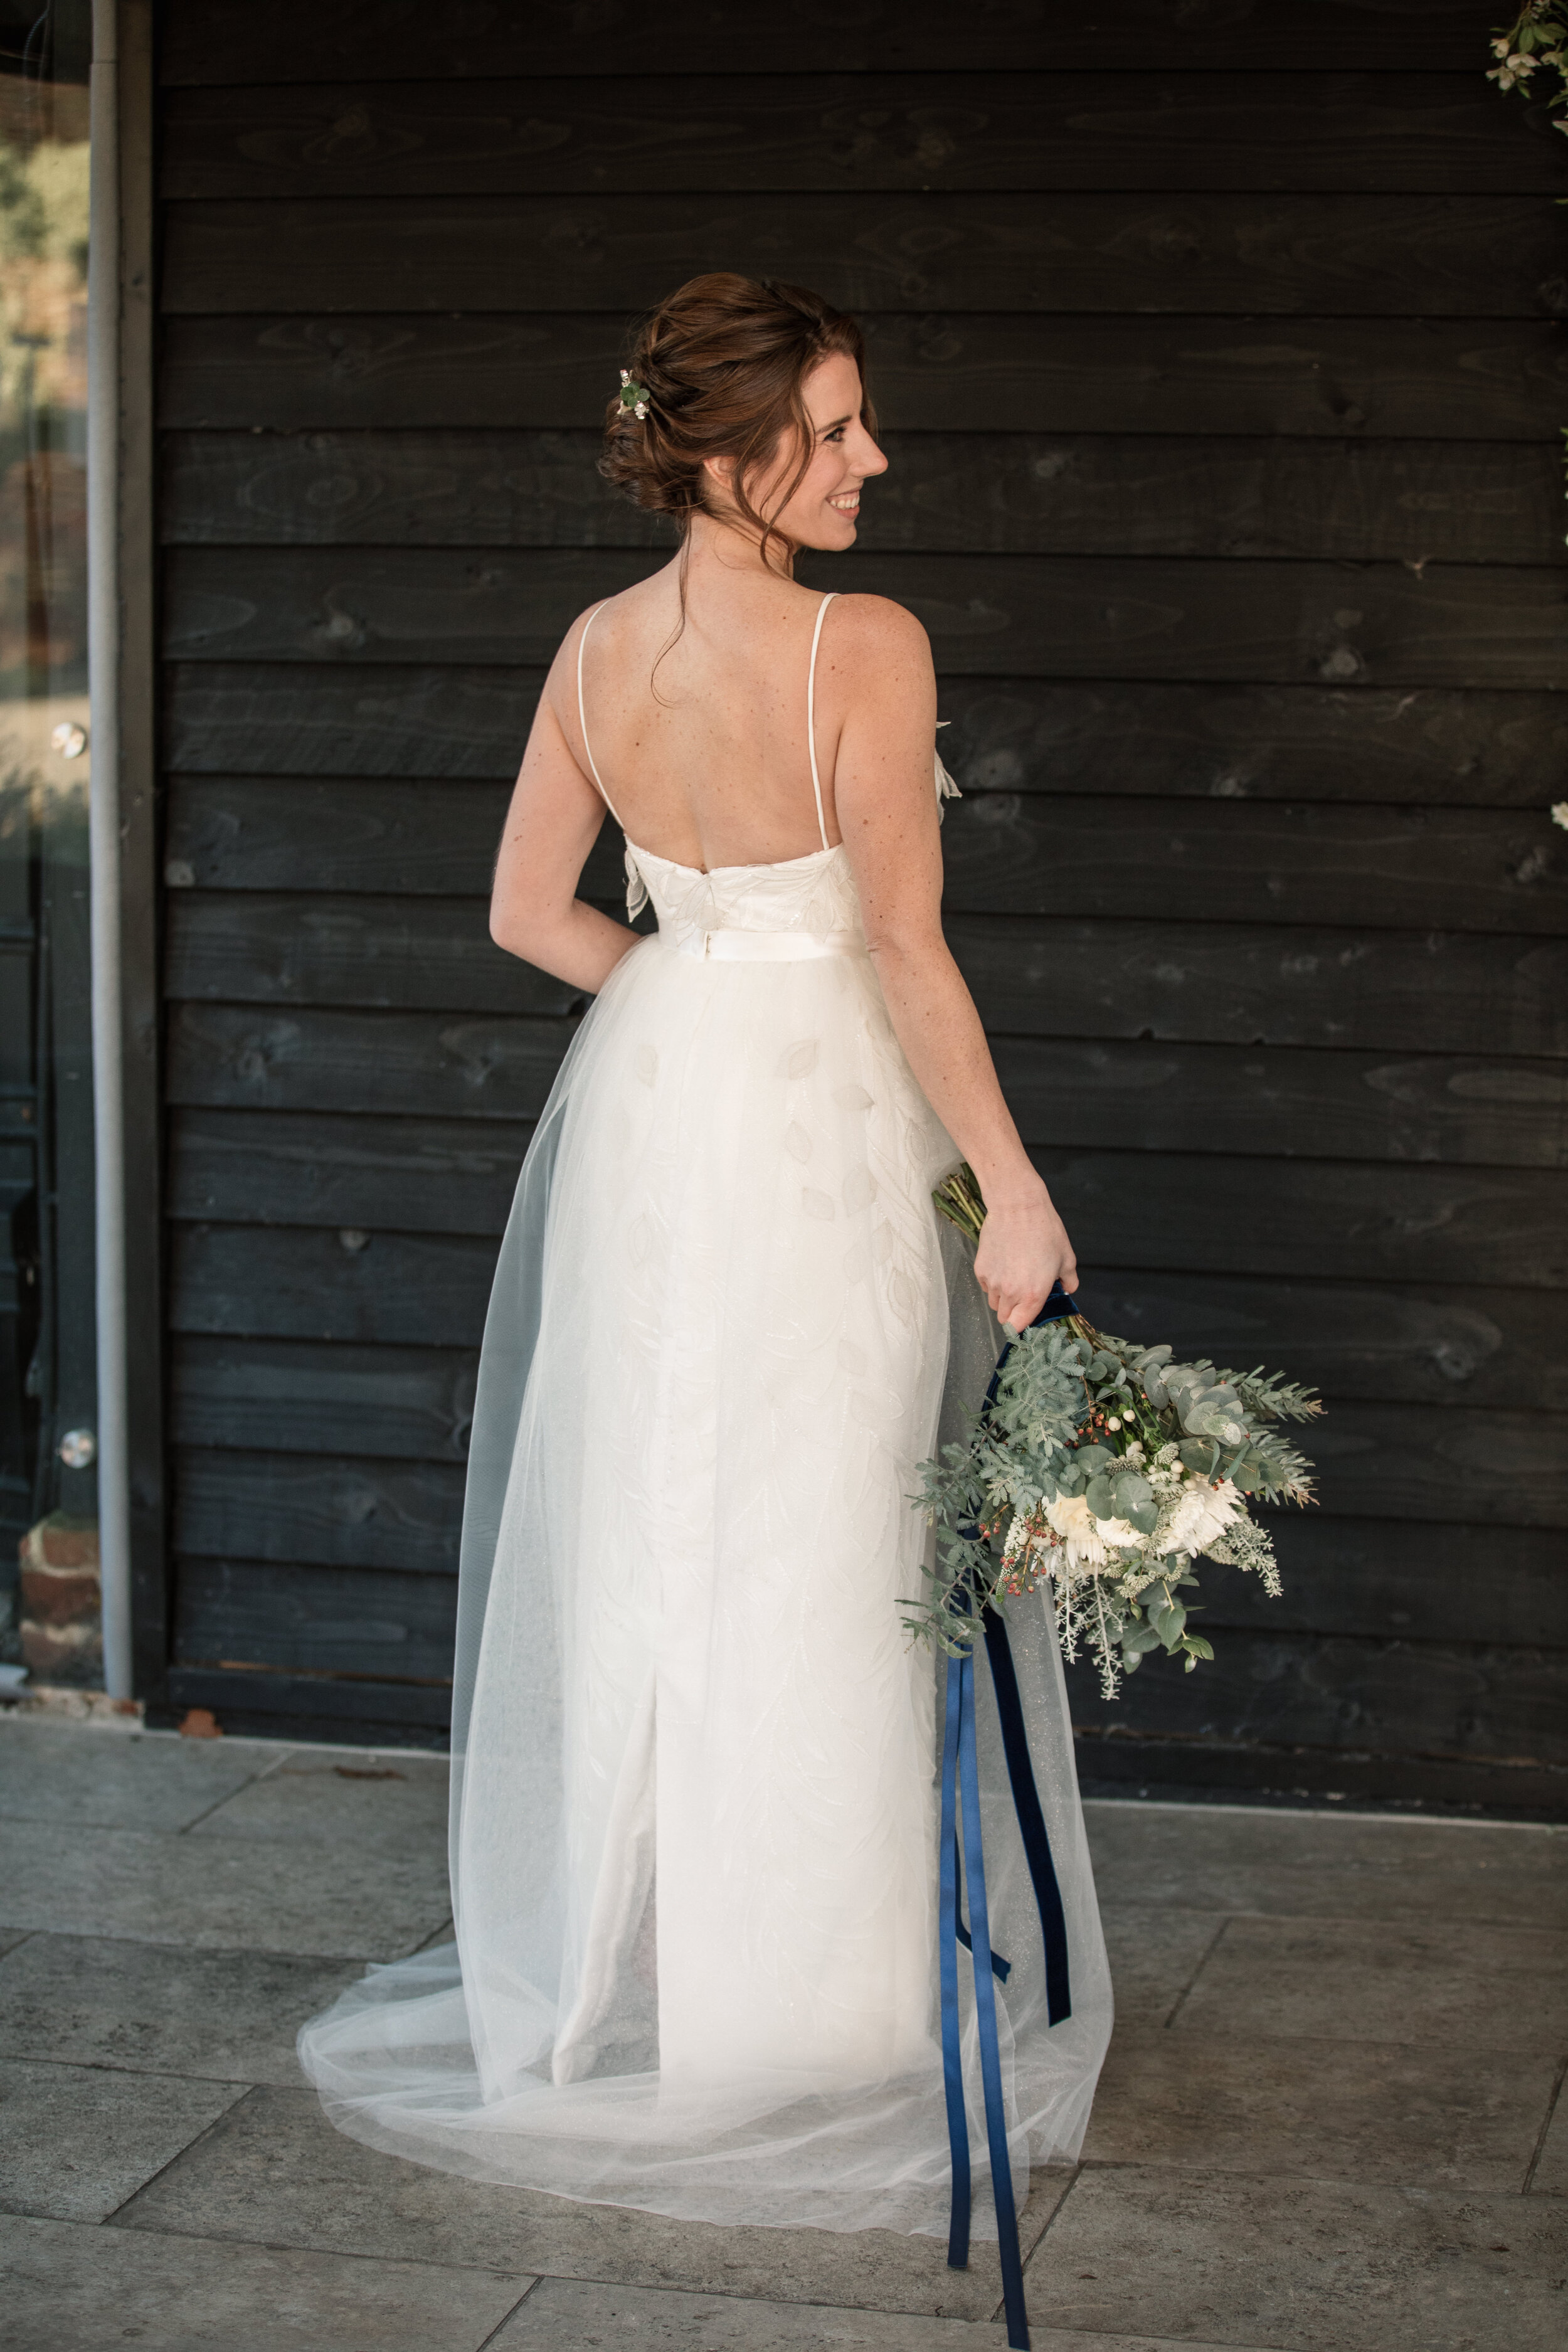 Christmas Inspiration_Winter Wedding_Coltsfoot Hertfordshire_Bride_Lace Bridal Gown_Lisa Lyons Bridal_Becky Harley Photography